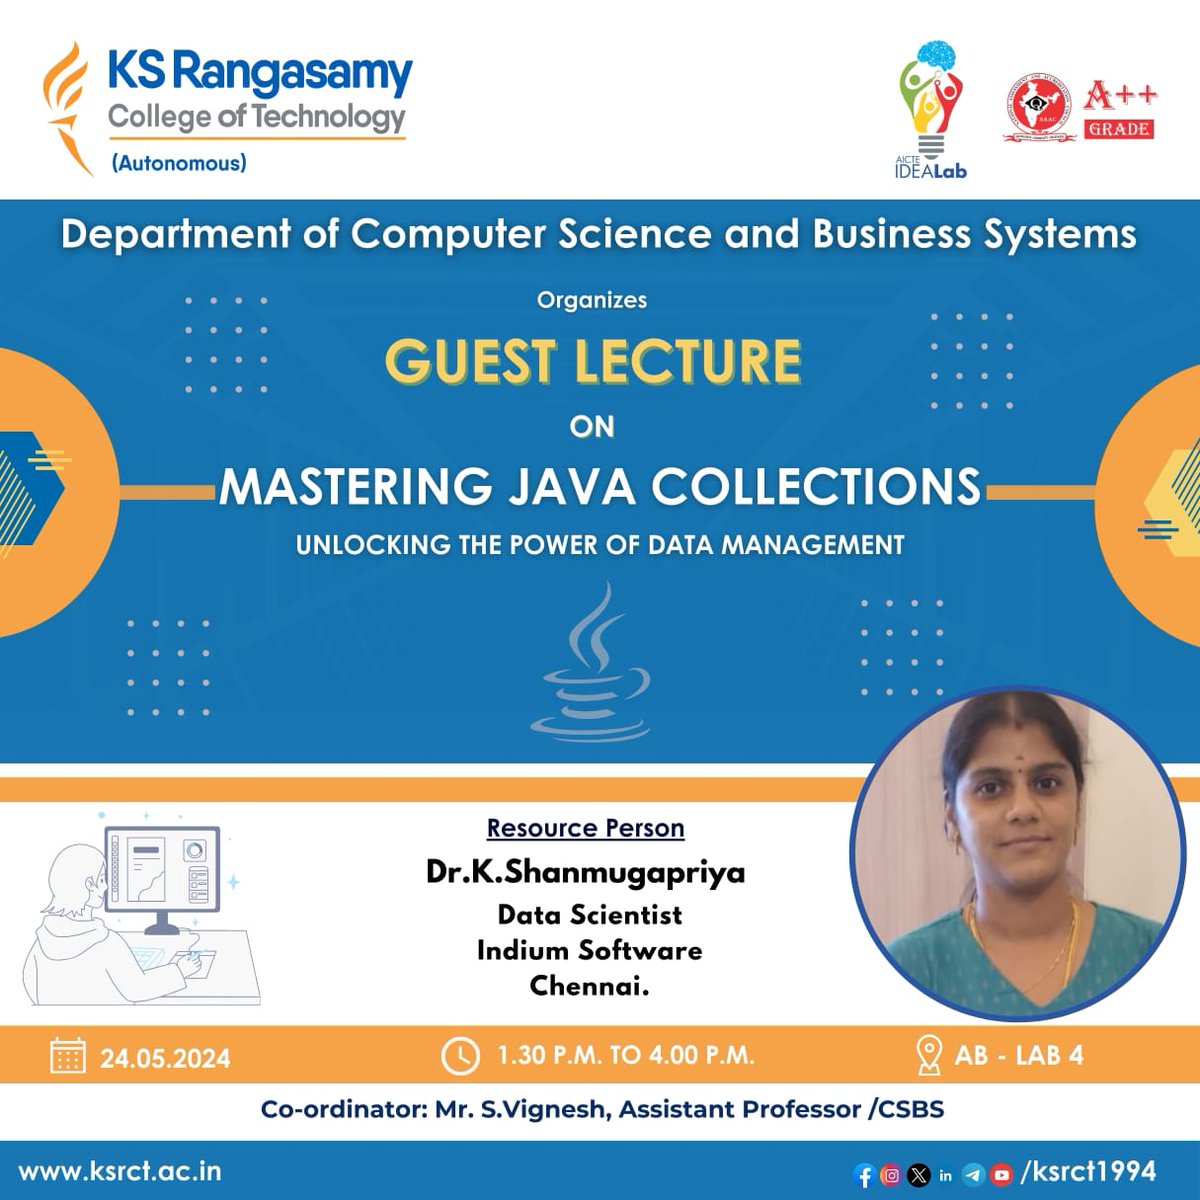 Department of #Computer Science and Business Systems, #ksrct1994 organizing #GuestLecture on “Mastering Java Collection: Unlocking the Power of Data management” at AB Lab 4 on 24.05.2024.